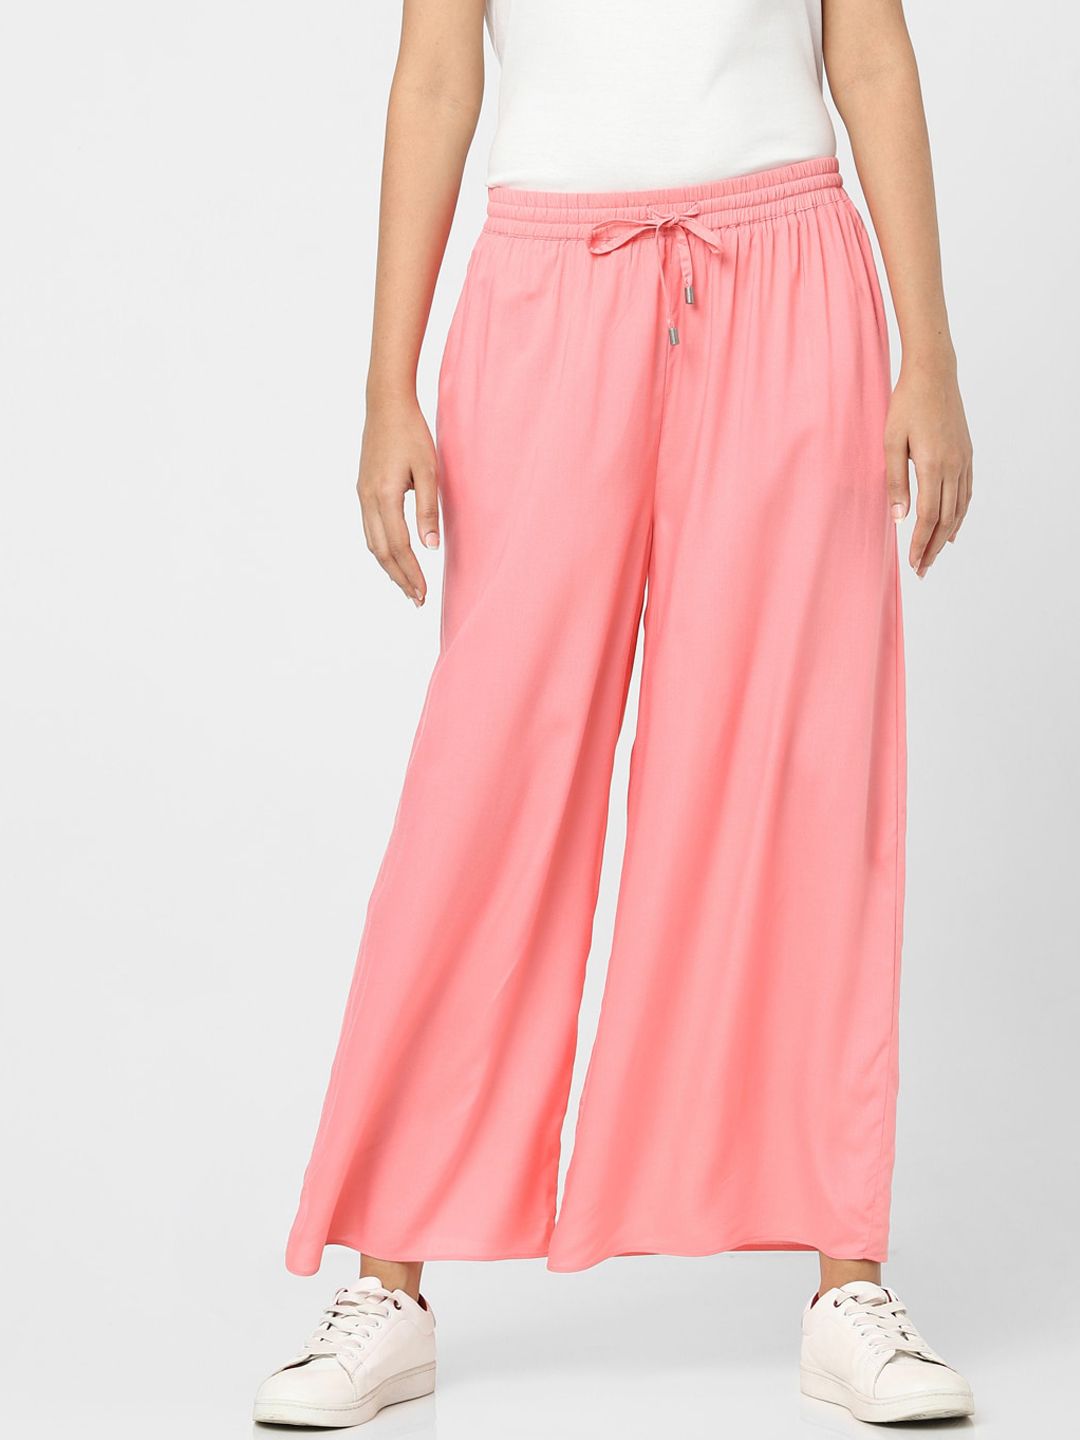 Vero Moda Women Rose Pink Pleated Trousers Price in India